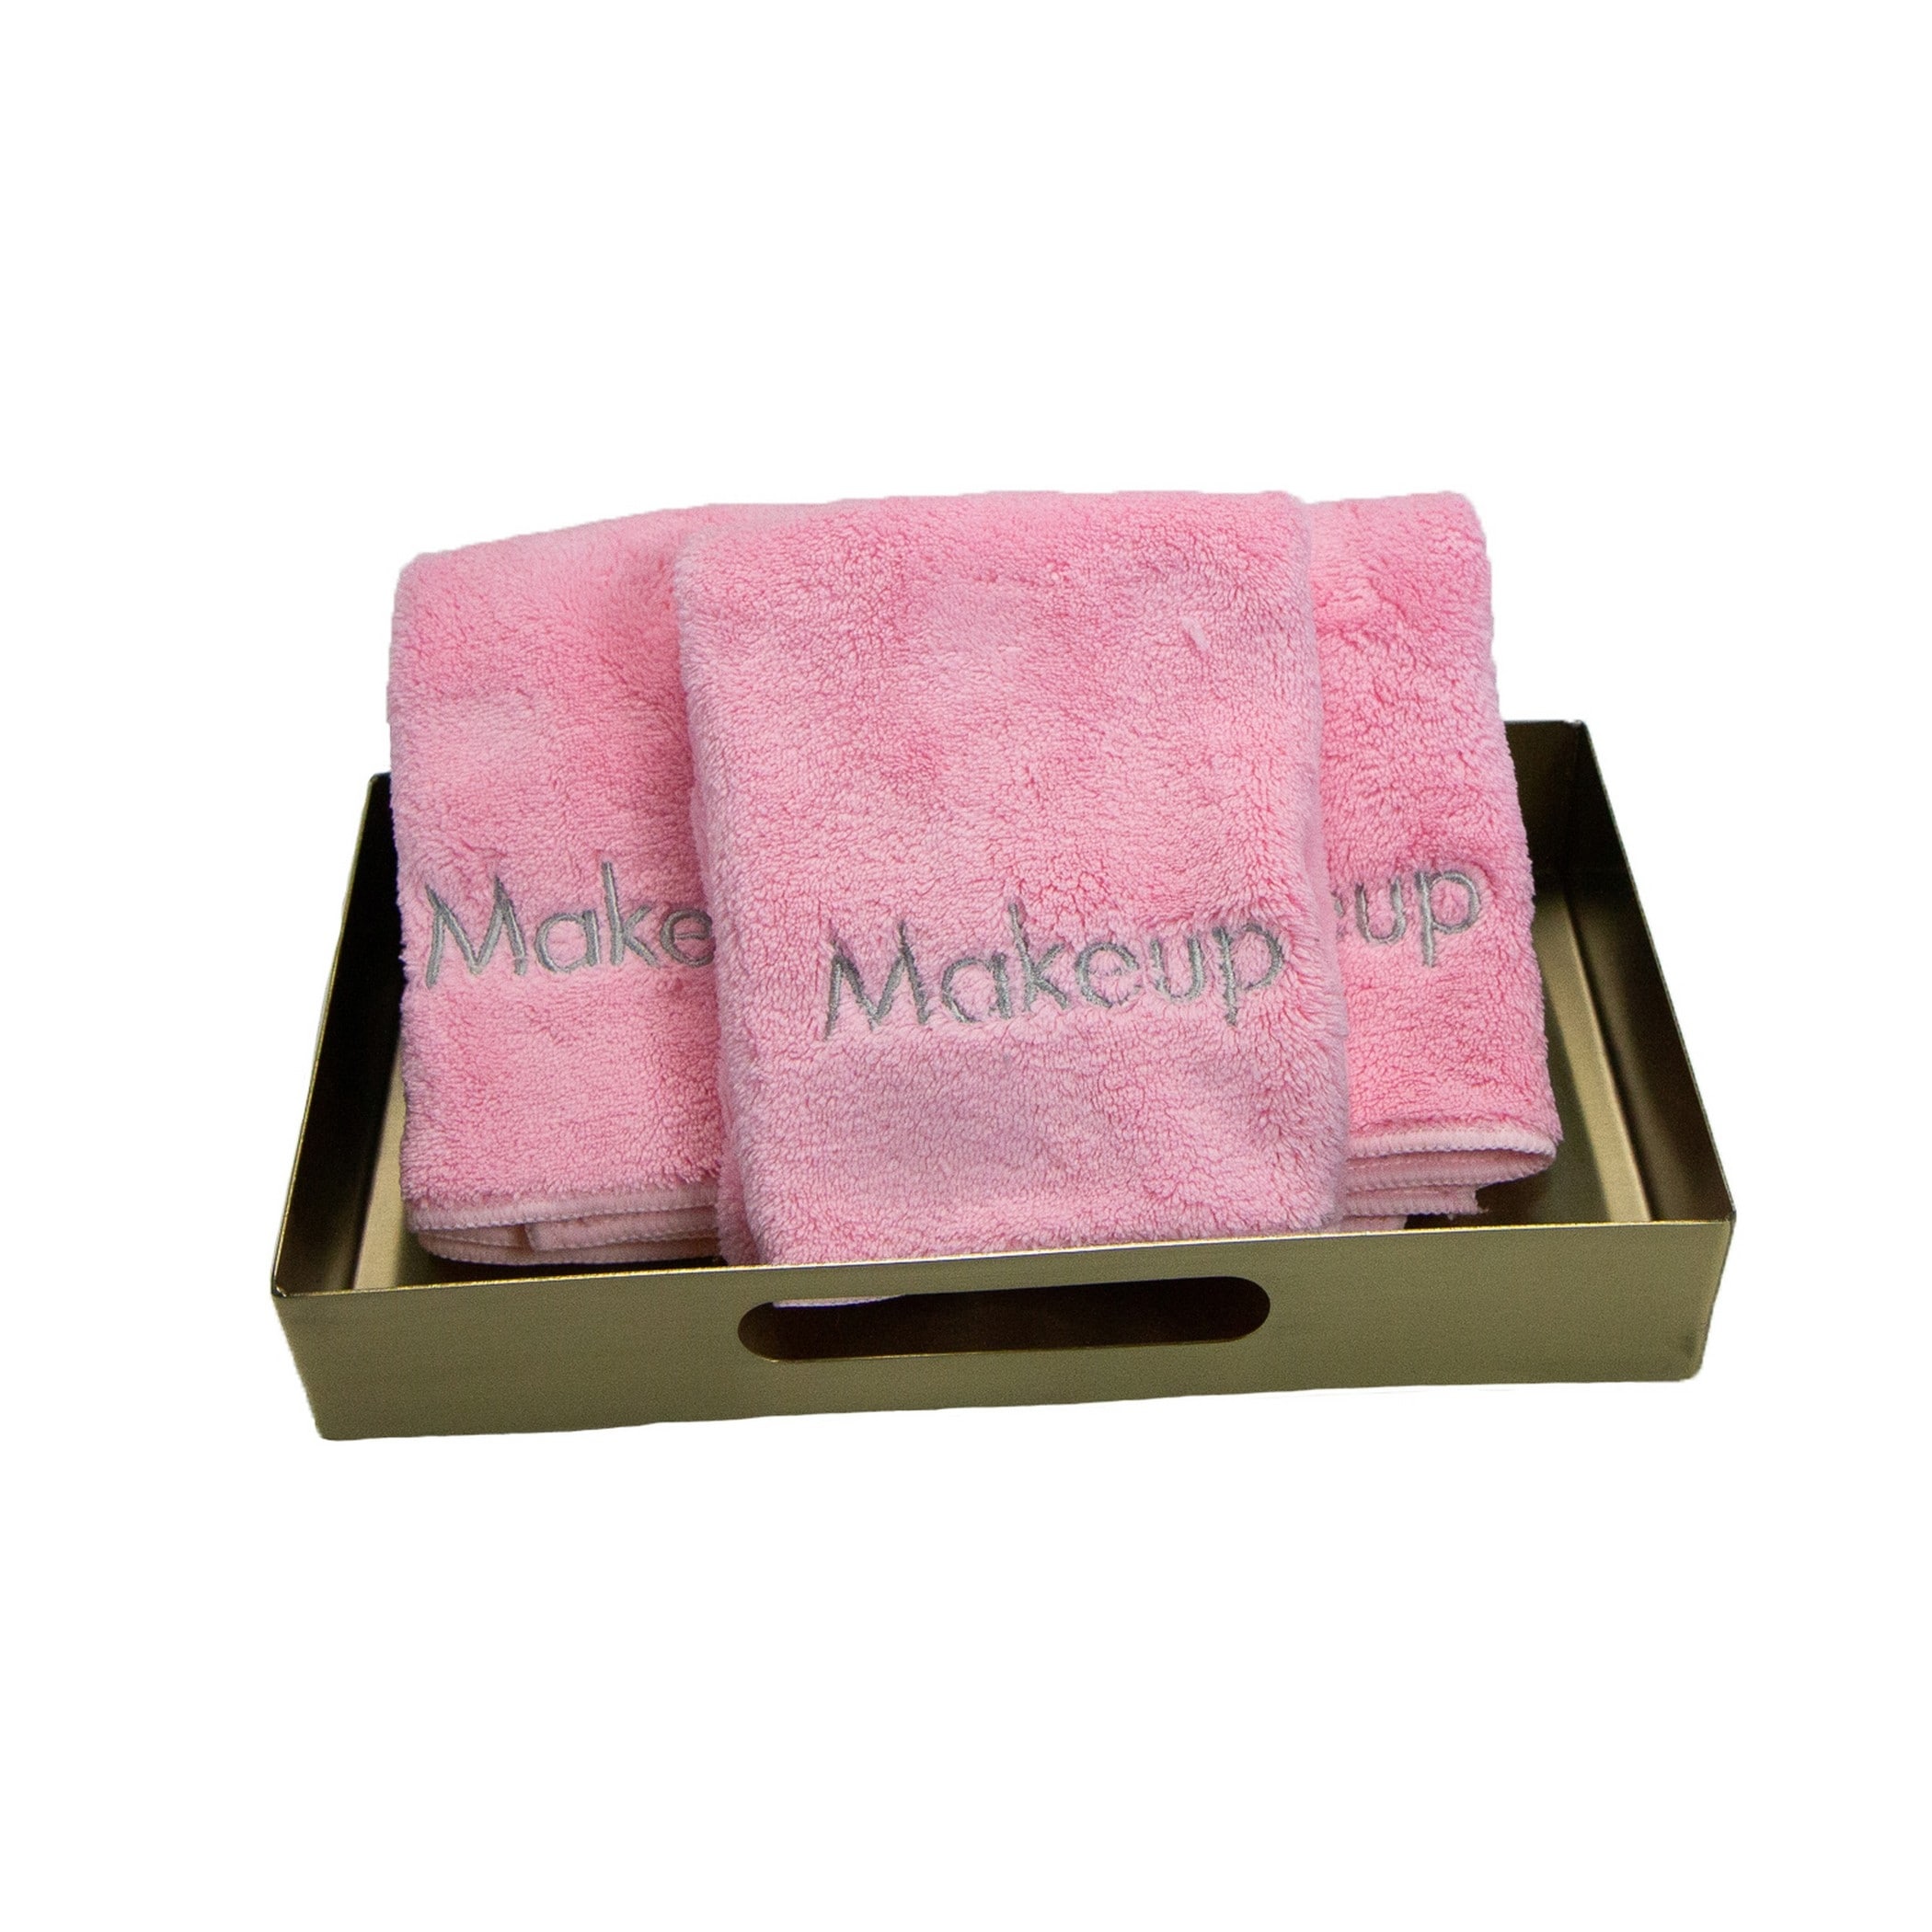 https://ak1.ostkcdn.com/images/products/is/images/direct/cdb1914a5fd69d755e6afc2fc6088eb38d85fde6/Arkwright-Coral-Fleece-6-Piece-Makeup-Towels.jpg